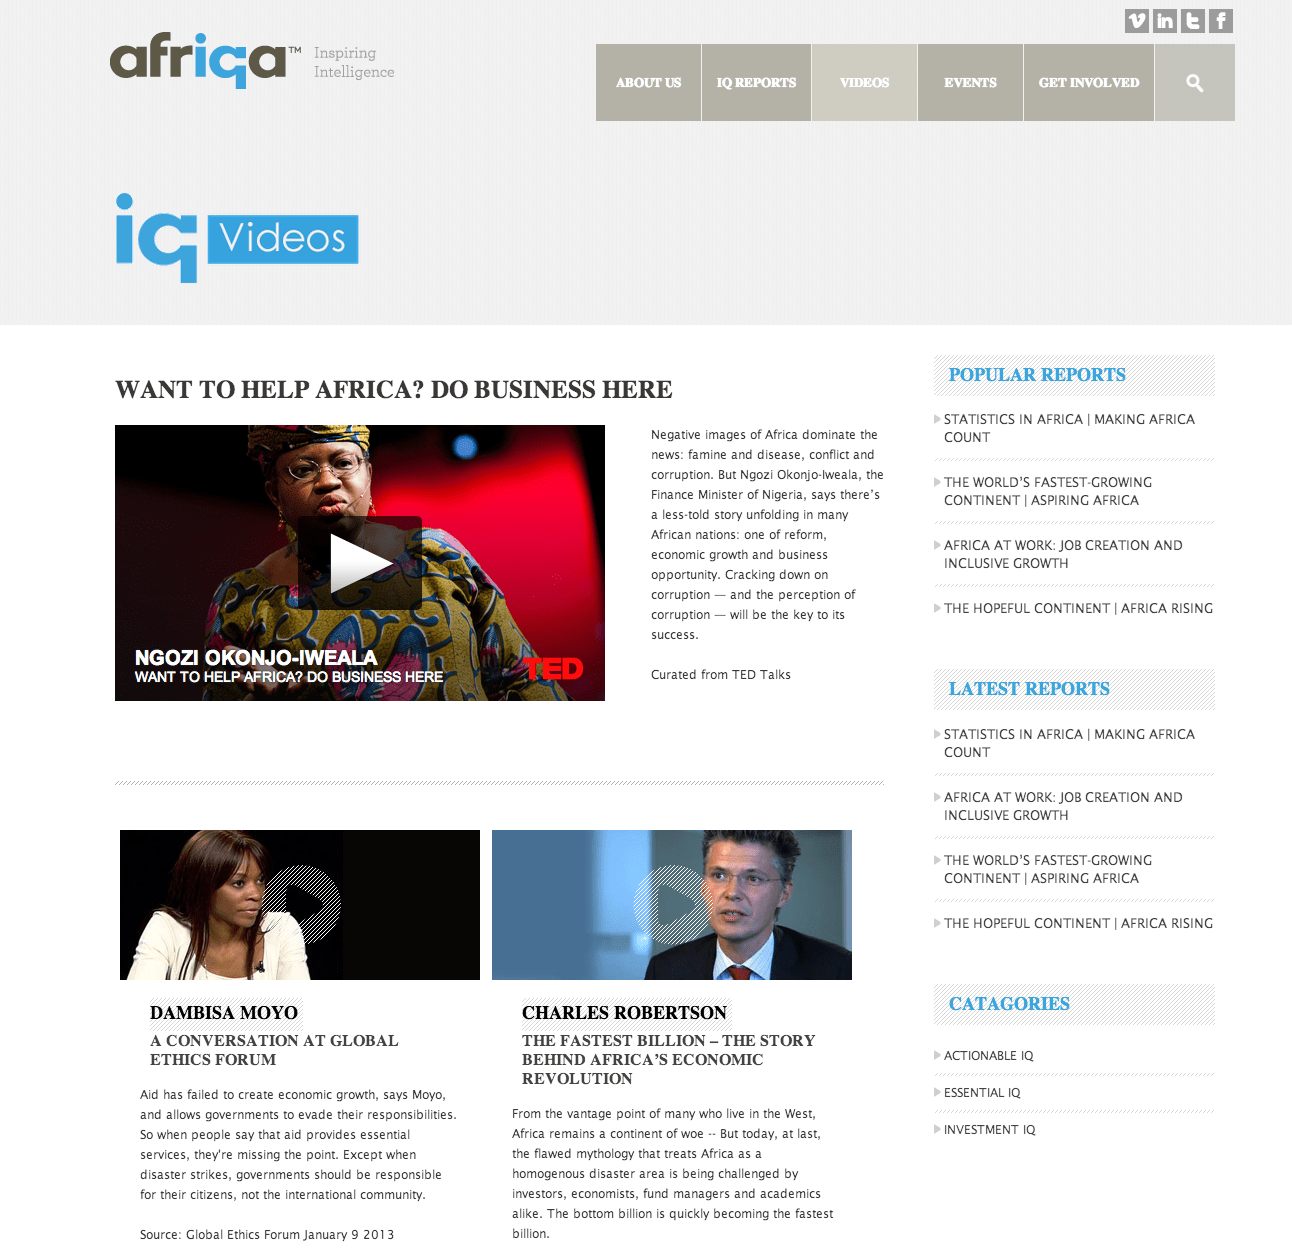 AfricaIQ Videos Page (After)